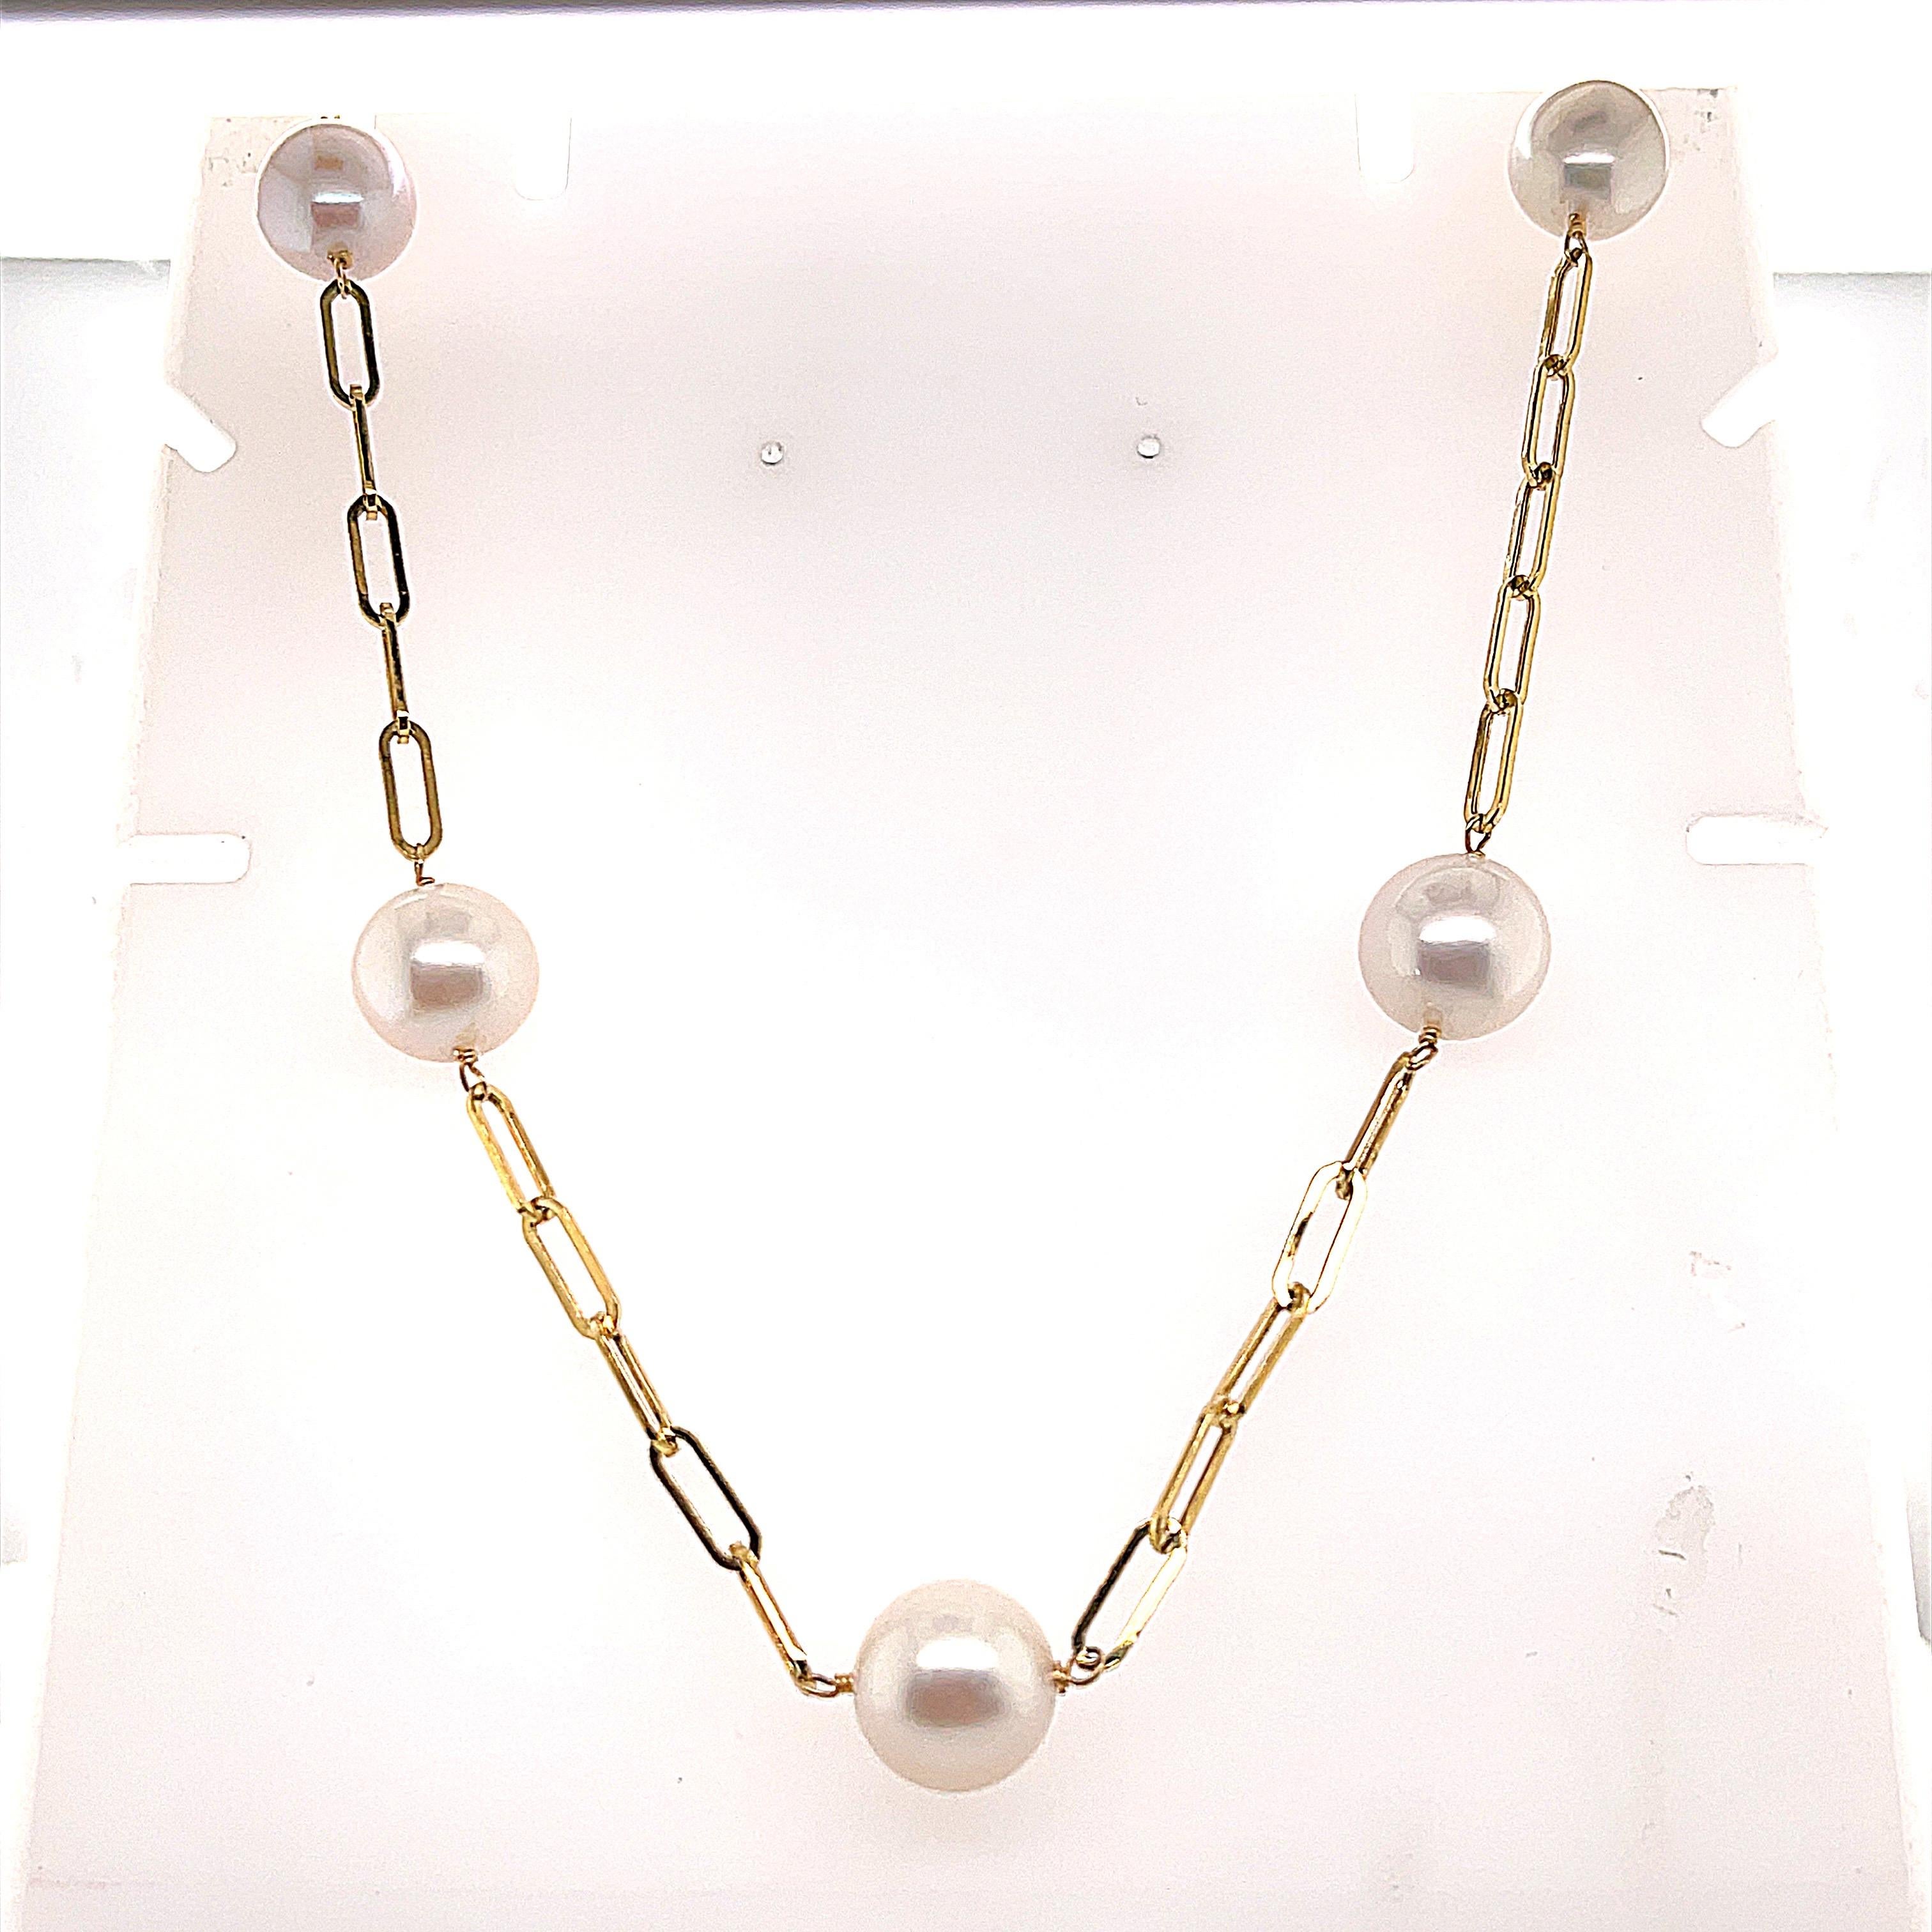 14K Yellow Gold Paper clip Necklace
White freshwater cultured pearl 10.50-11.50mm 
Lobster clasp
18